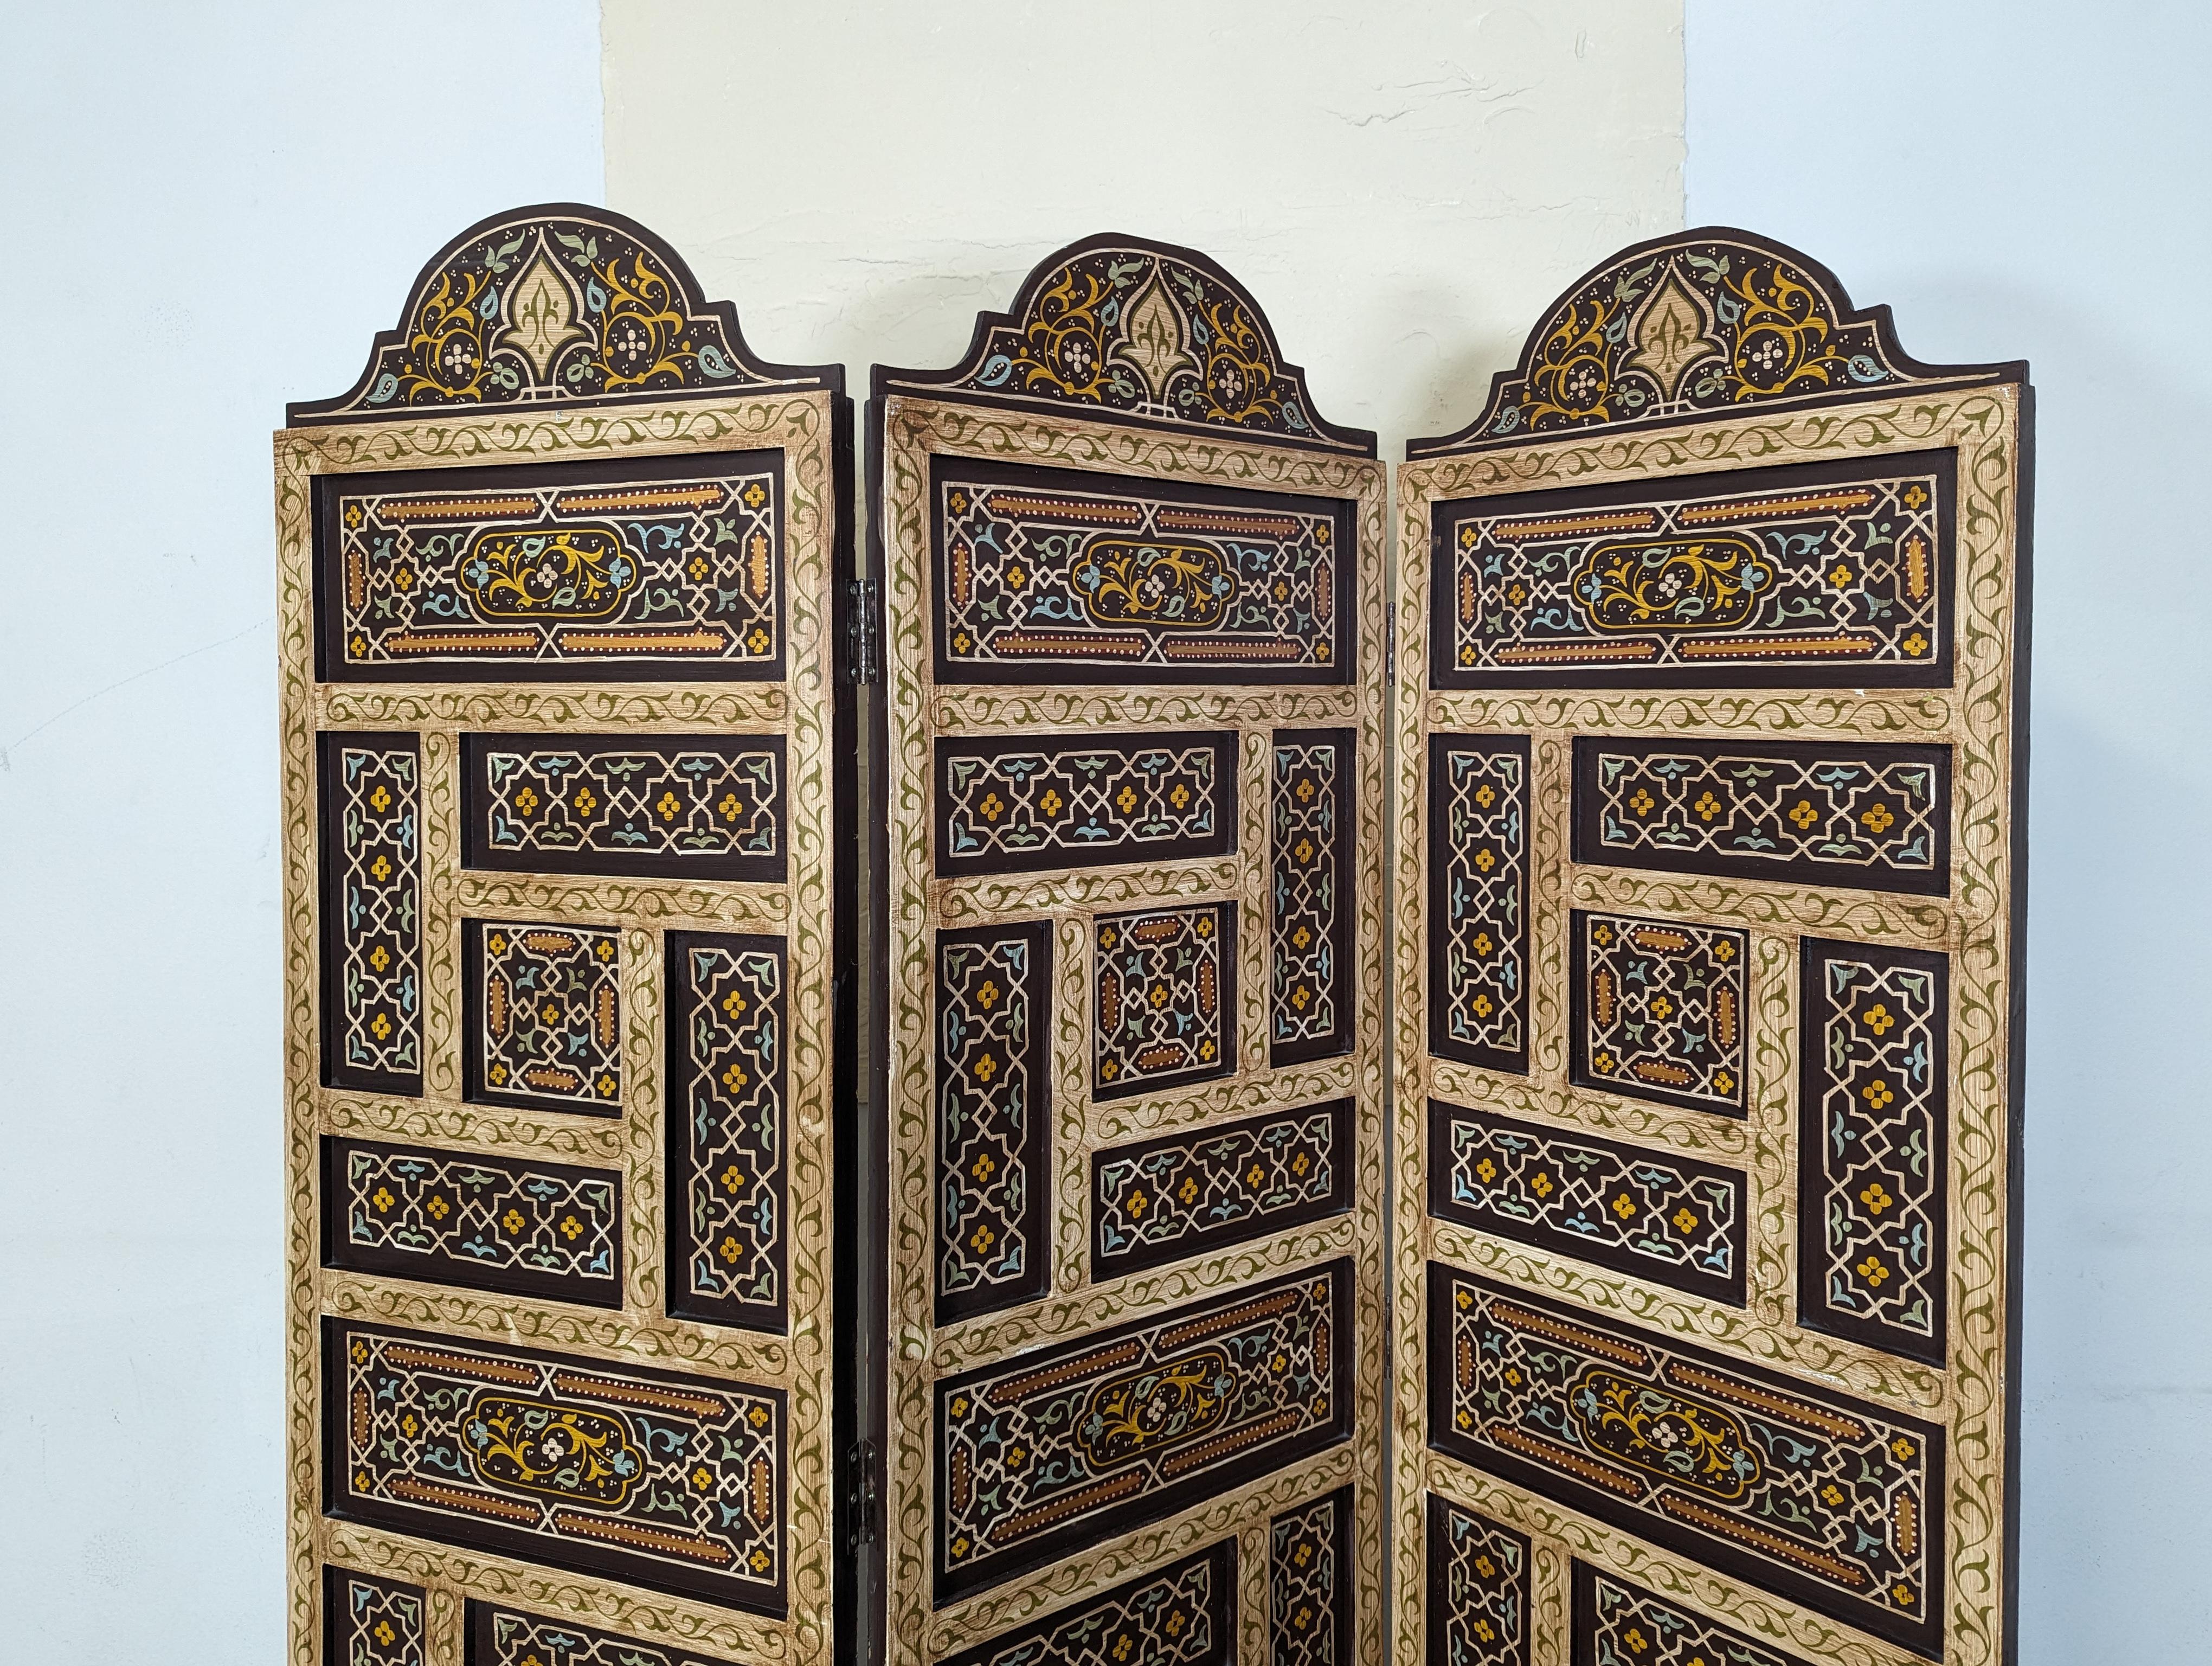 Step into the realm of vintage charm and distinctive style with this exquisite room divider, a piece that exudes the mysterious allure of a Moroccan bazaar or a Mediterranean villa. Spanning a total width of 57 inches, this three-panelled beauty